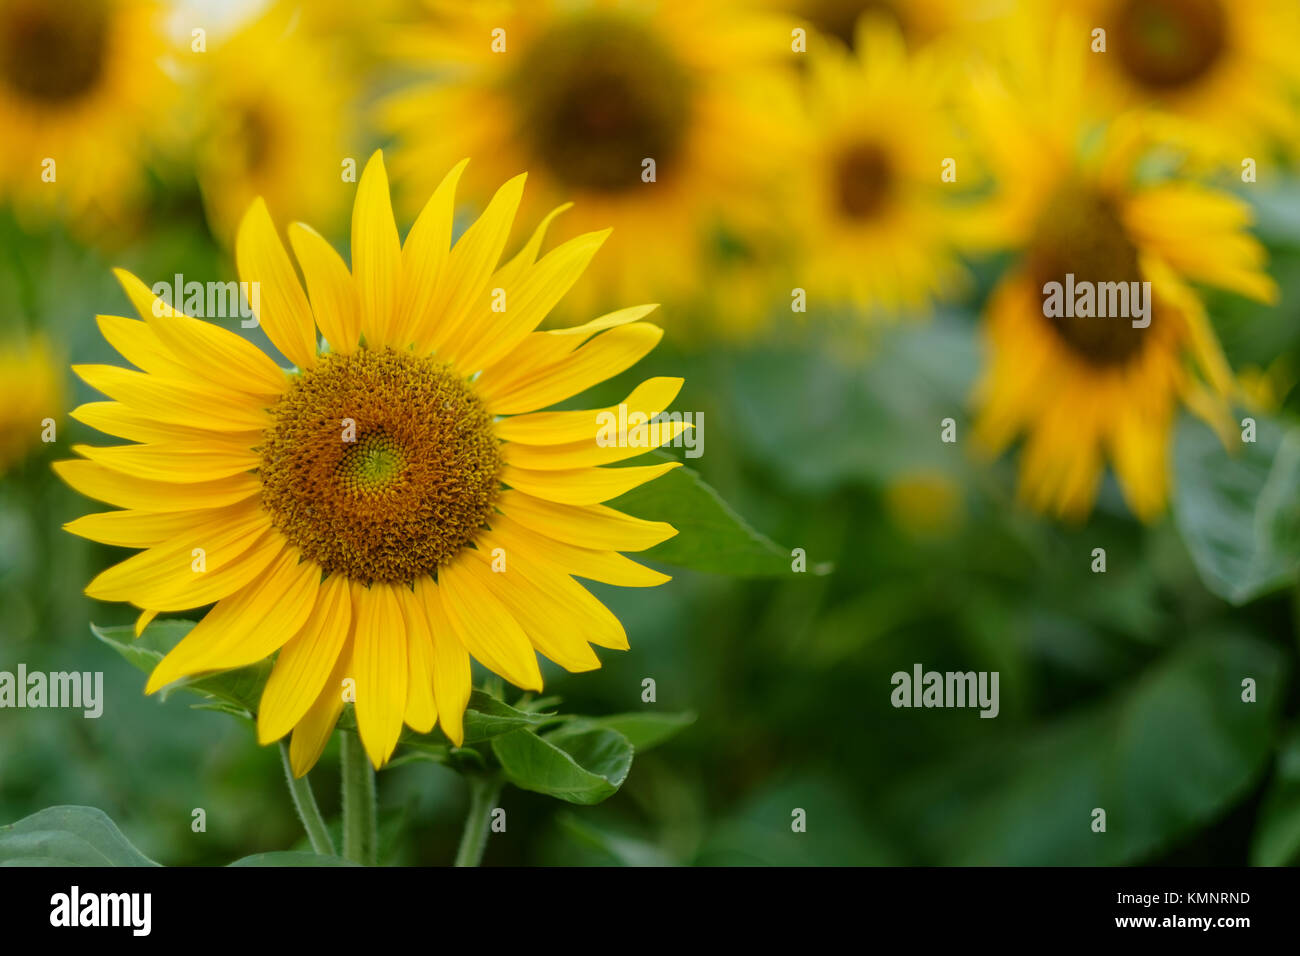 Sunflower field. One flower in the foreground in focus. In the background is a blurred field. Stock Photo